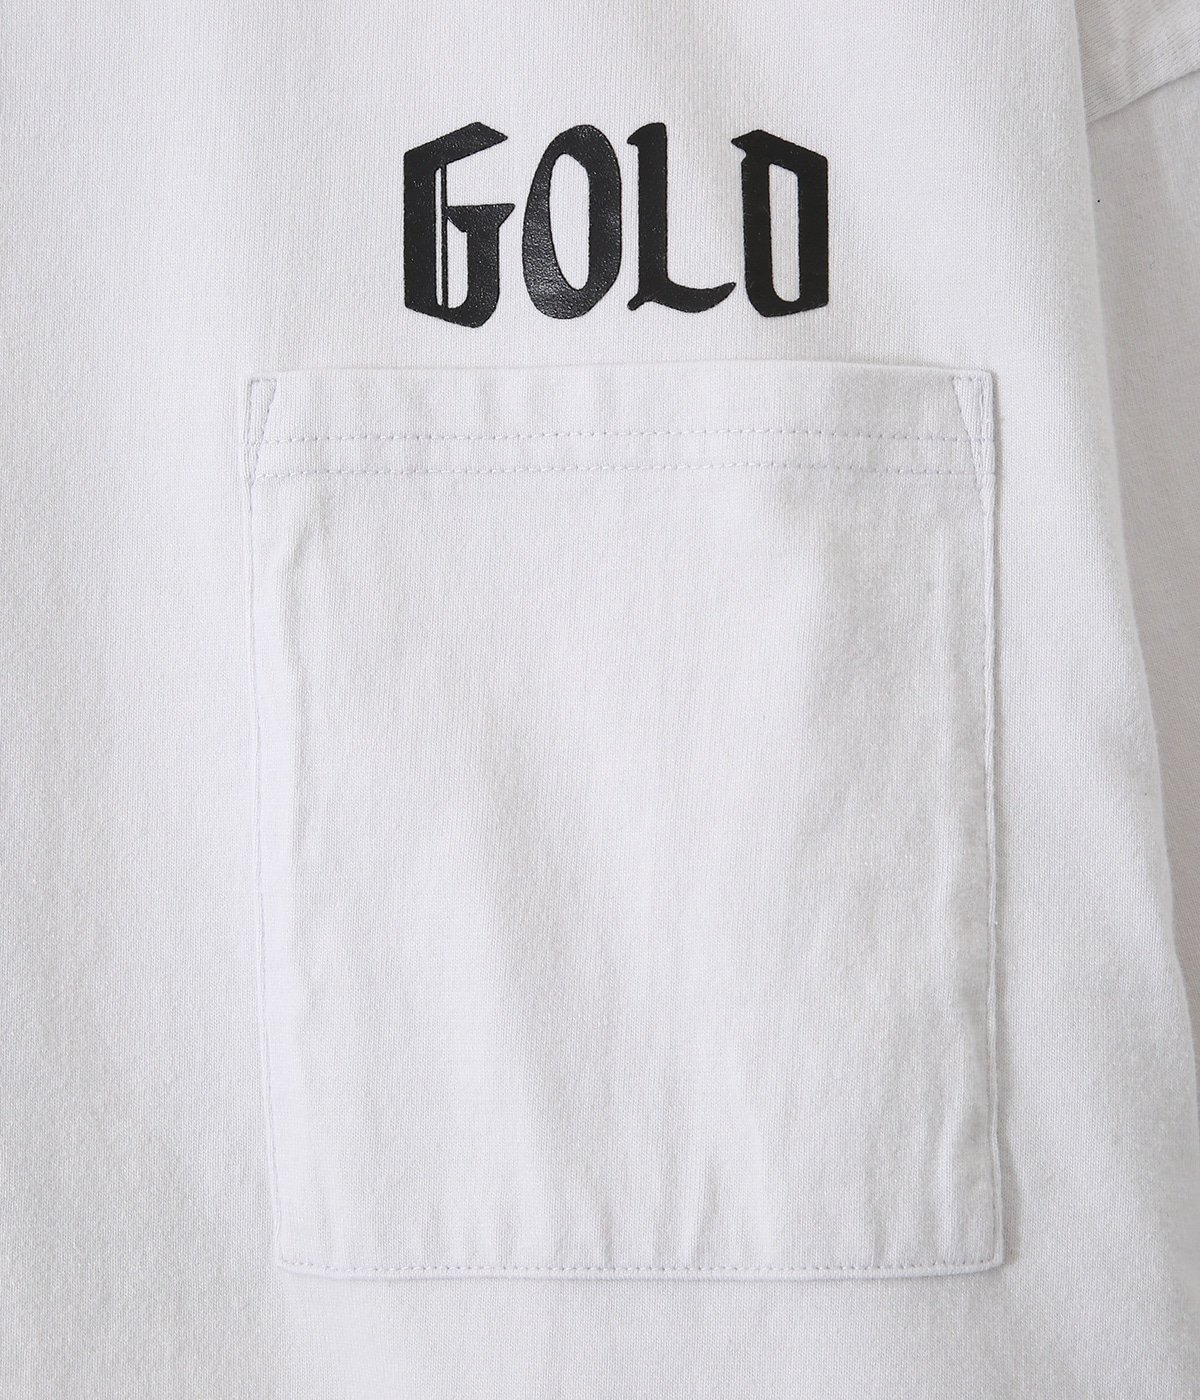 【ONLY ARK】別注14/- HEAVY COTTON S/S WIDE T-SHIRT -GOLD PRINT-